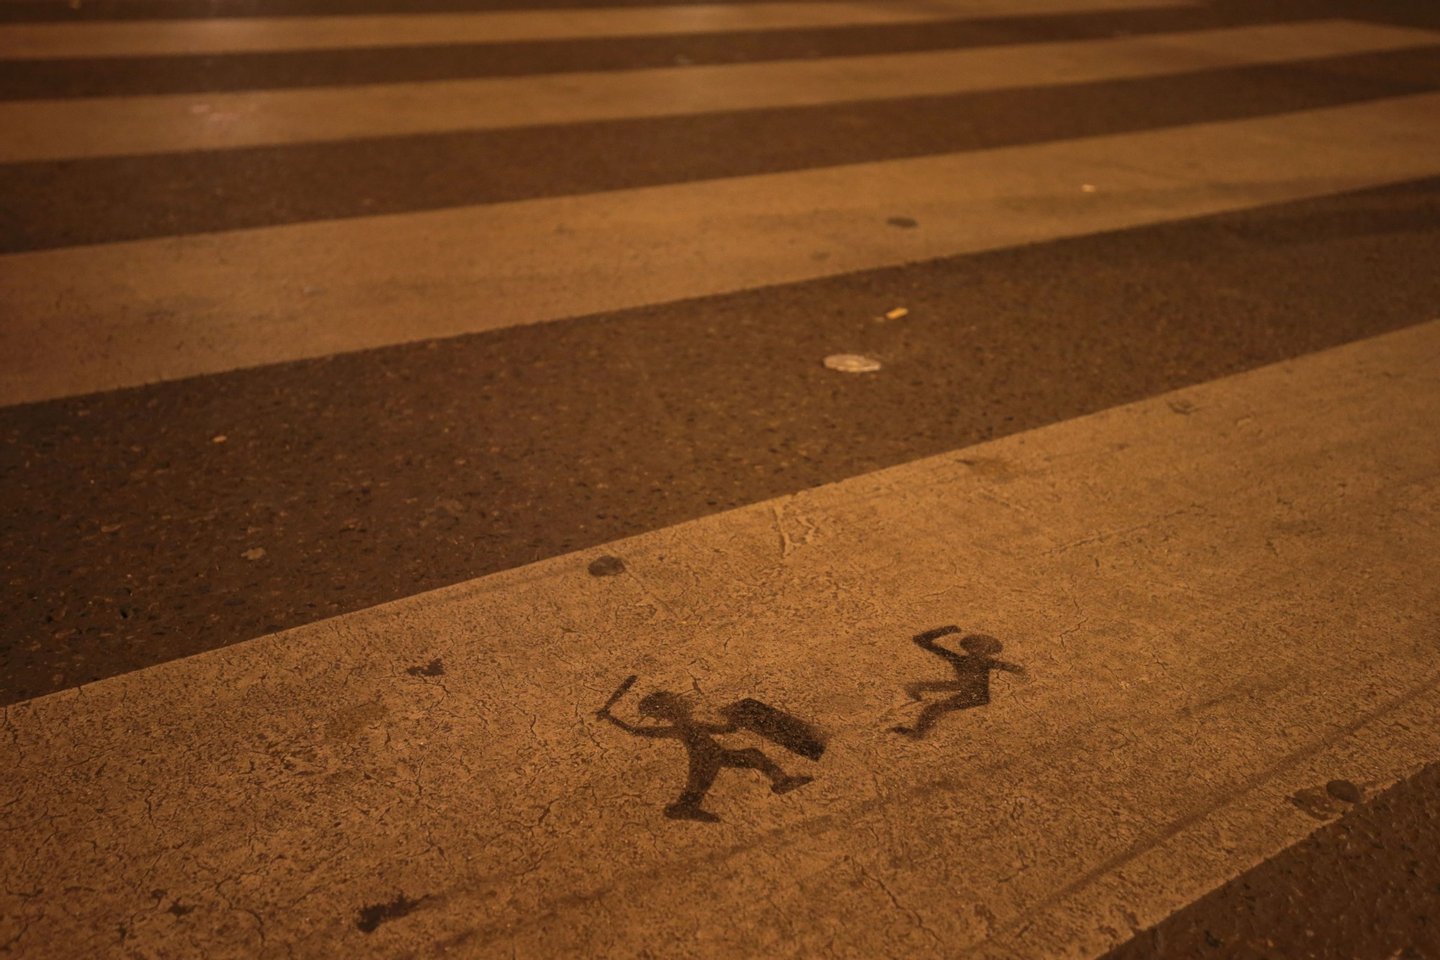 A stencil is sprayed onto a zebra crossing close to the Place de la Republique in Paris where the Nuit Debout, or "Up All Night" movement have been rallying against the French government's proposed labour reforms on April 29, 2016. AFP PHOTO / JOEL SAGET / AFP / JOEL SAGET (Photo credit should read JOEL SAGET/AFP/Getty Images)